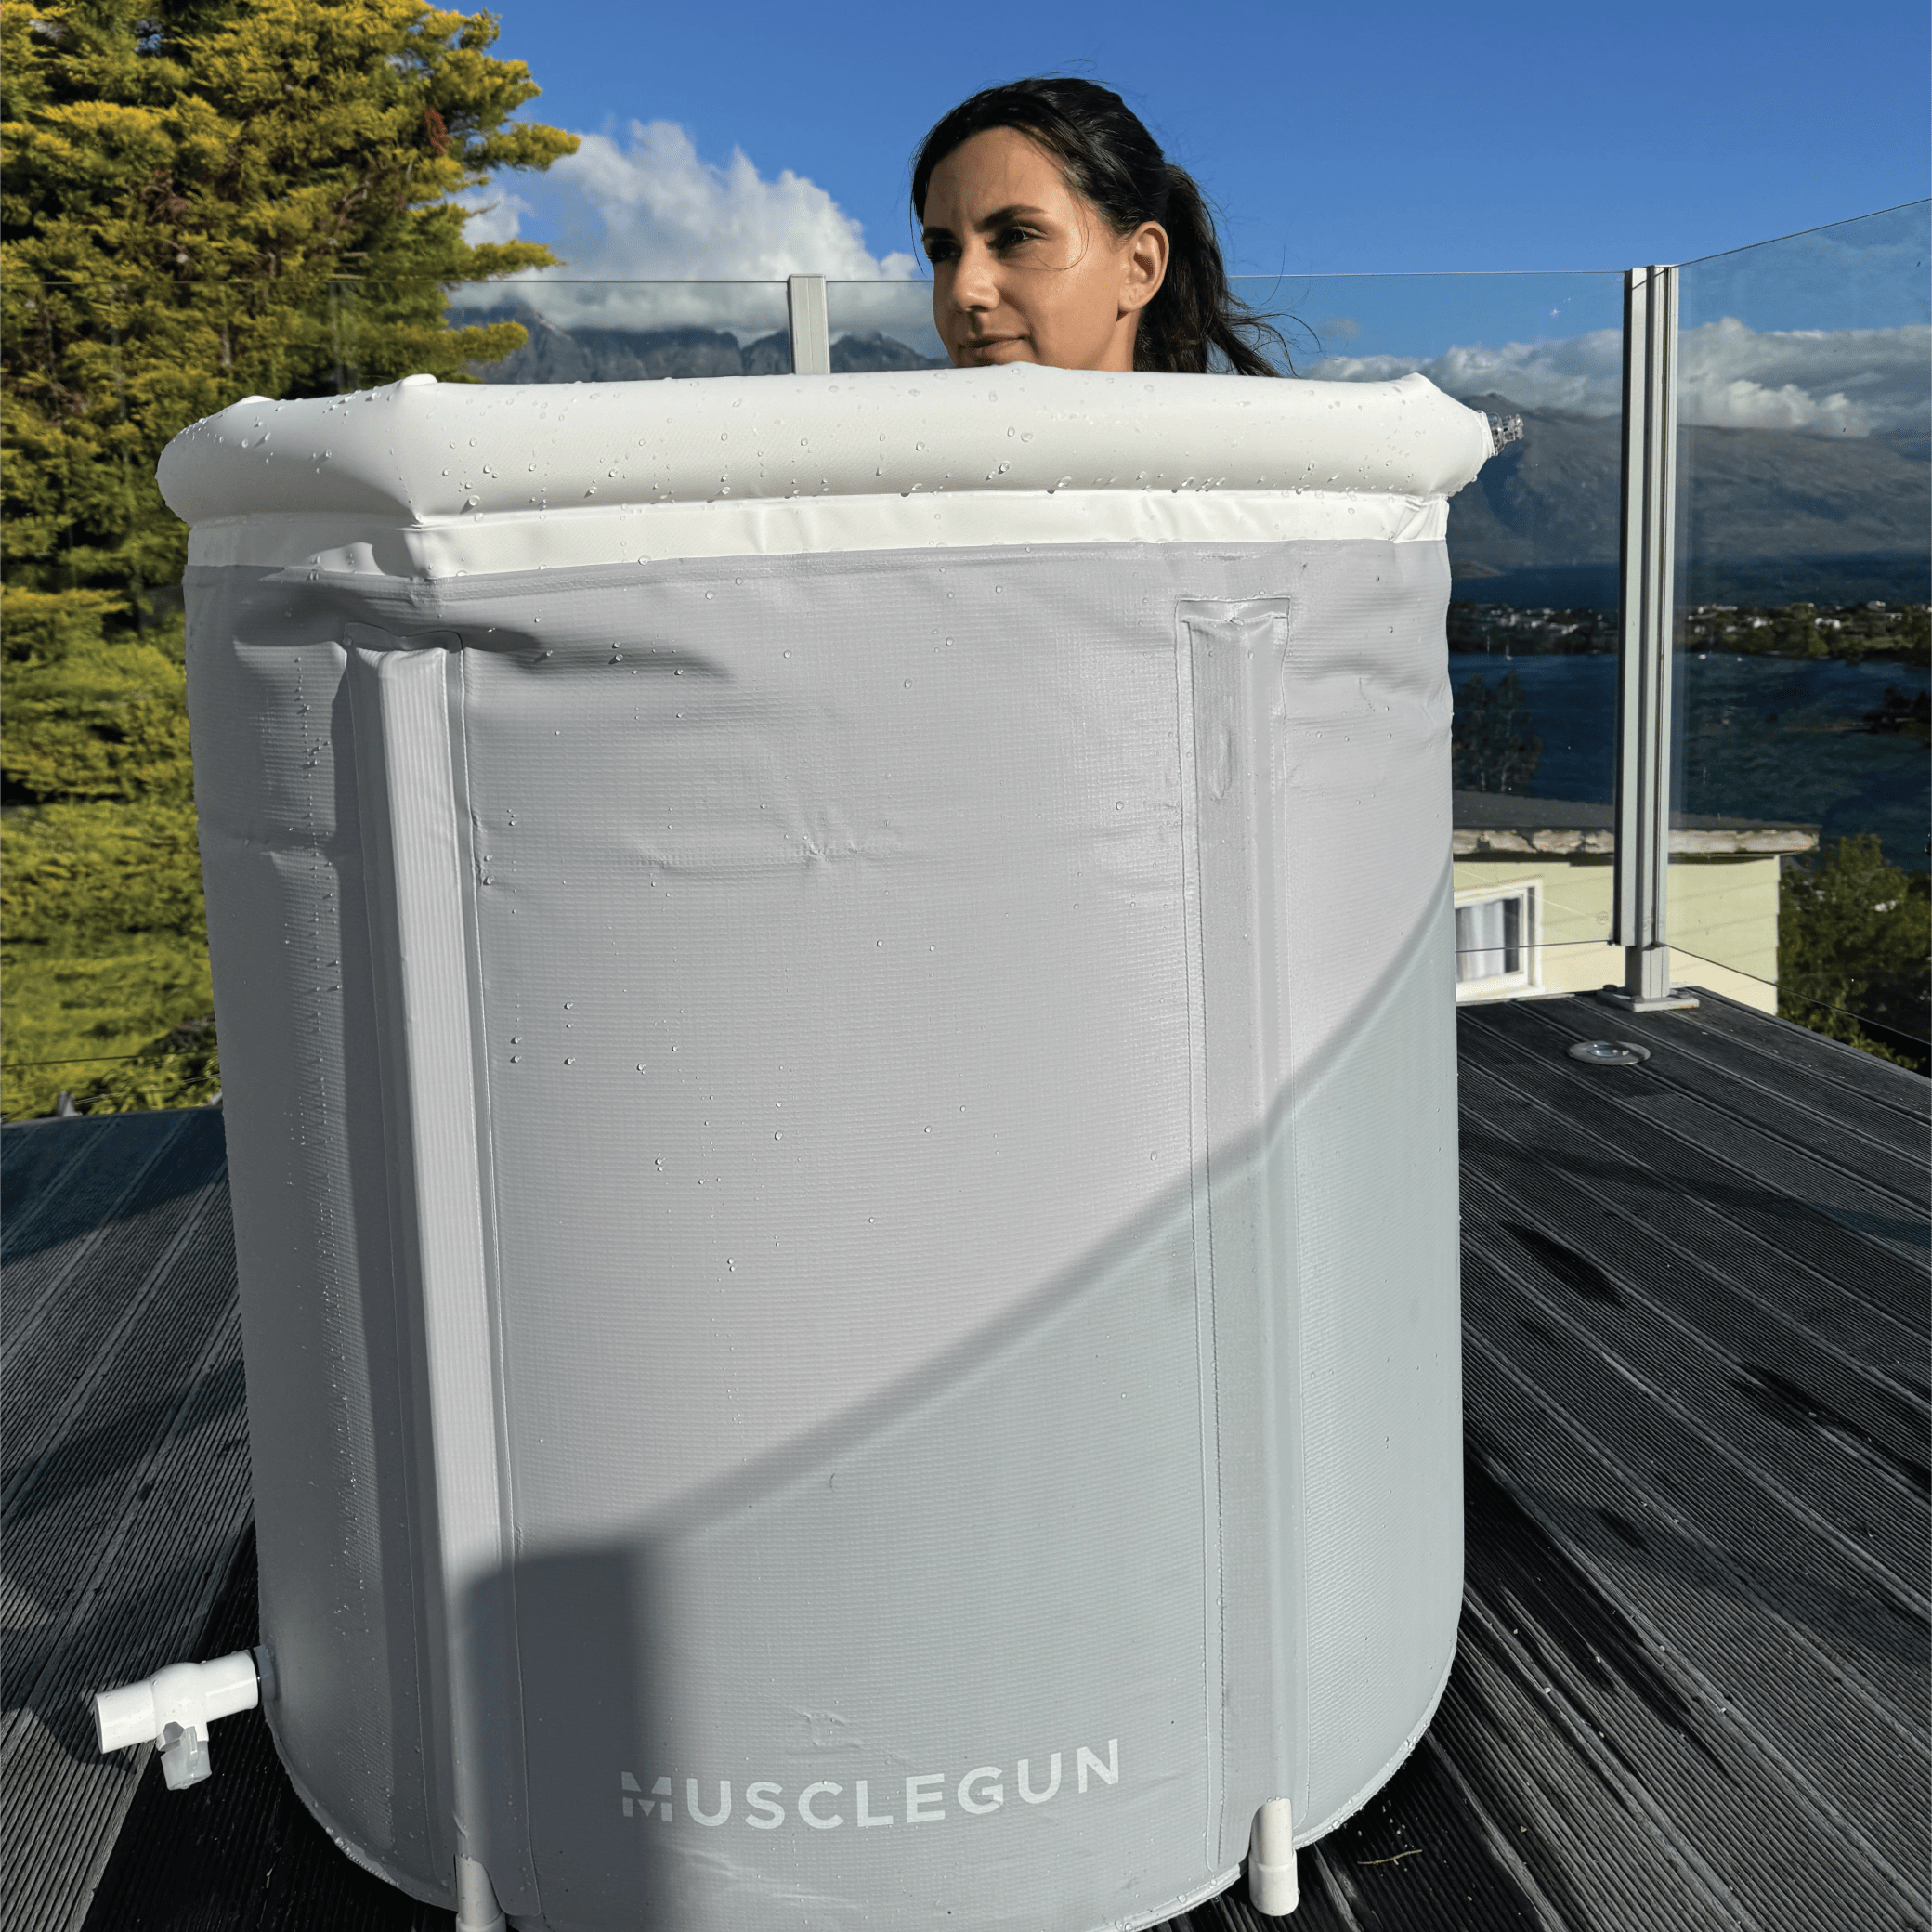 Ice Bath NZ: Cold Plunge Pool for Sale